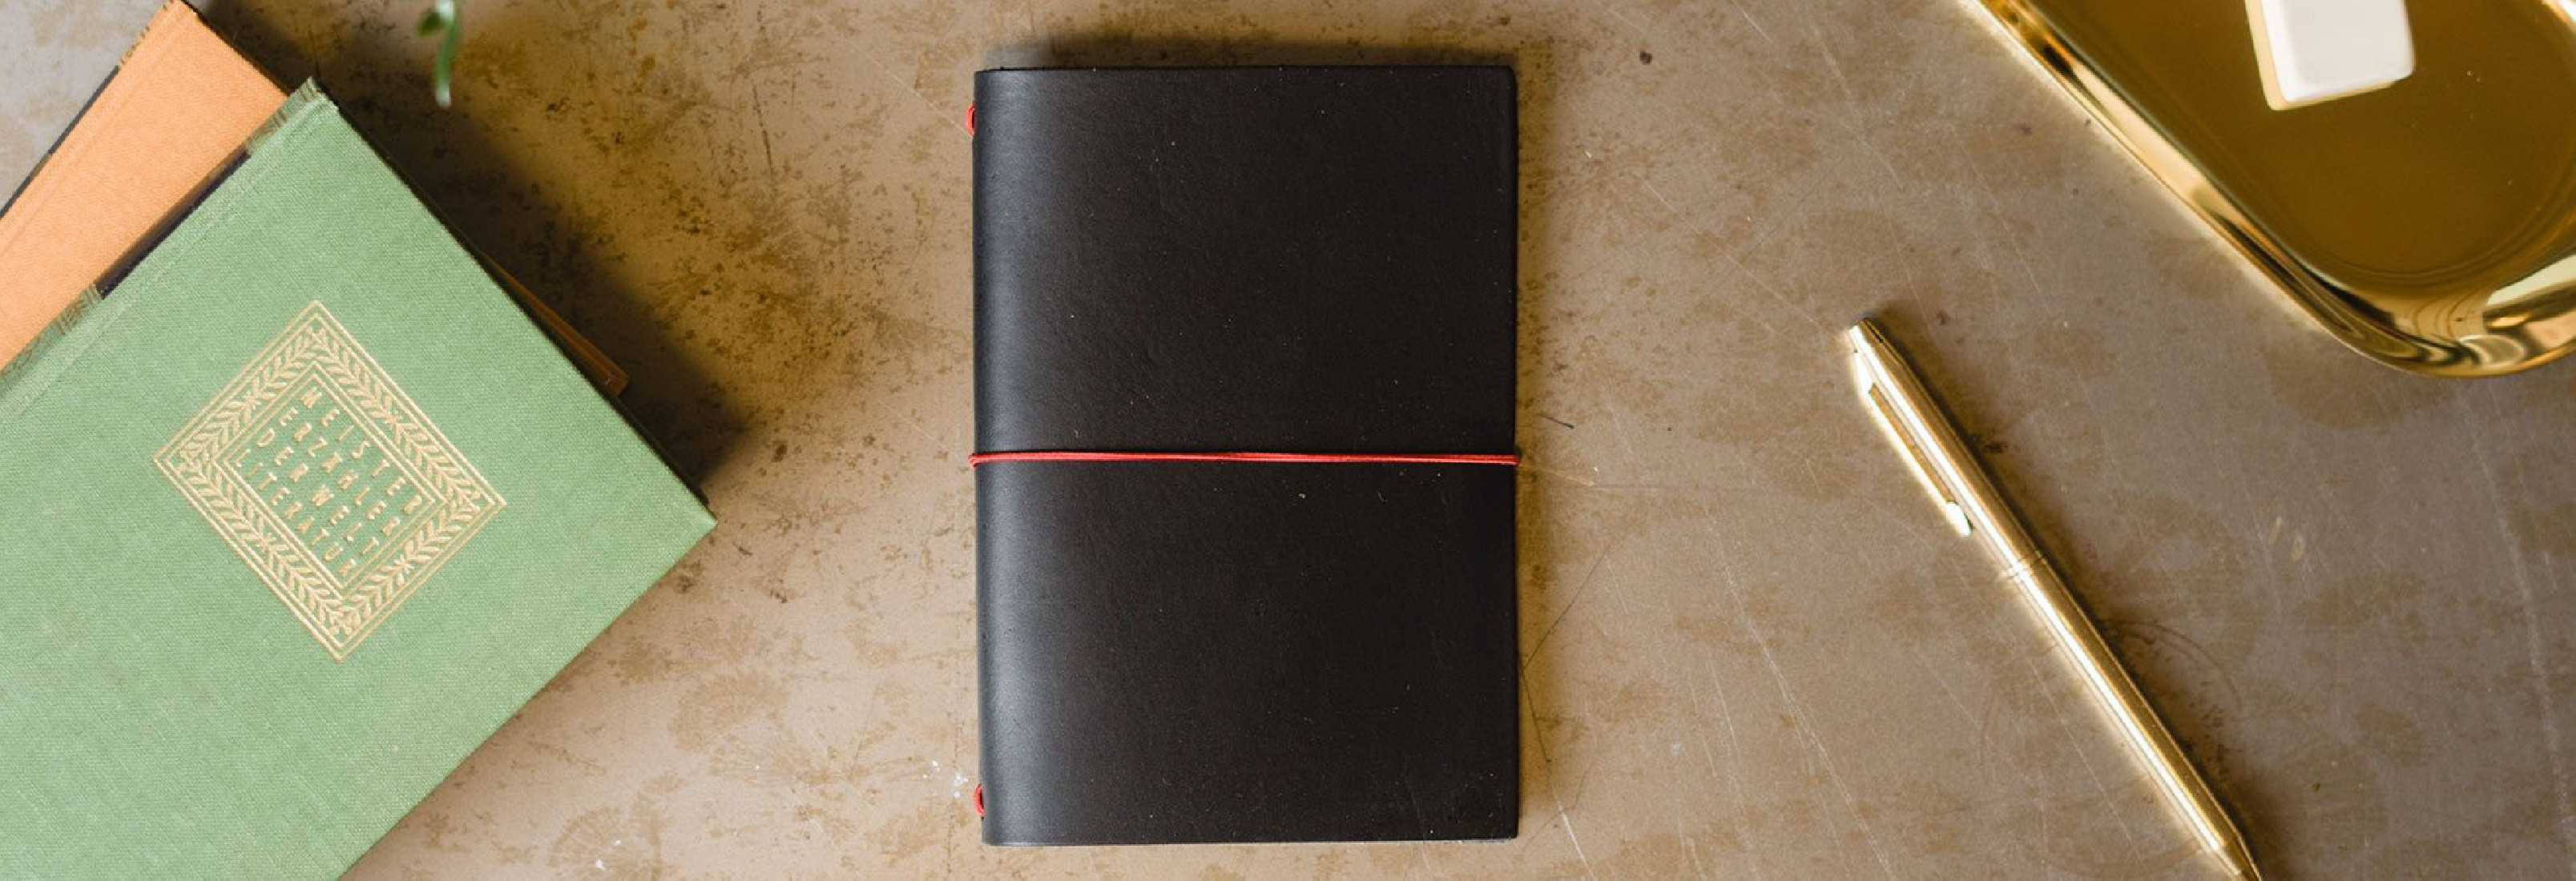 Paper Republic the writers essentials pocket black  leather journal kit